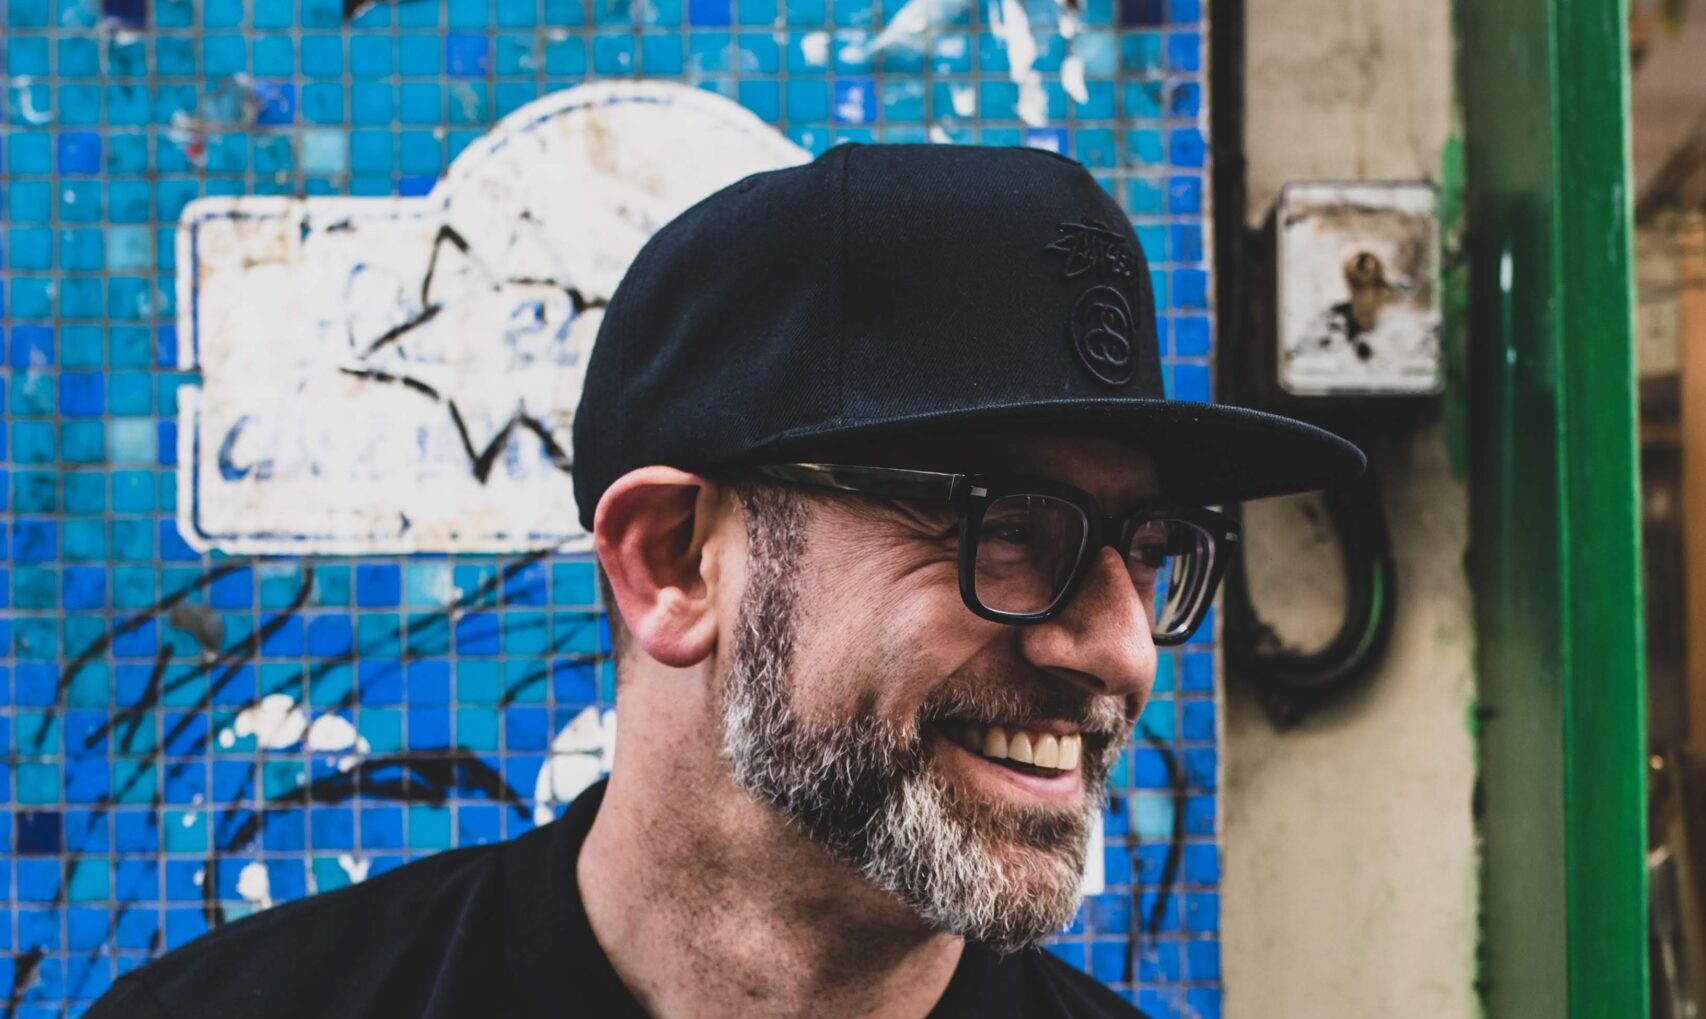 The author Kevin Coval in a black baseball cap and glasses, photographed on the street